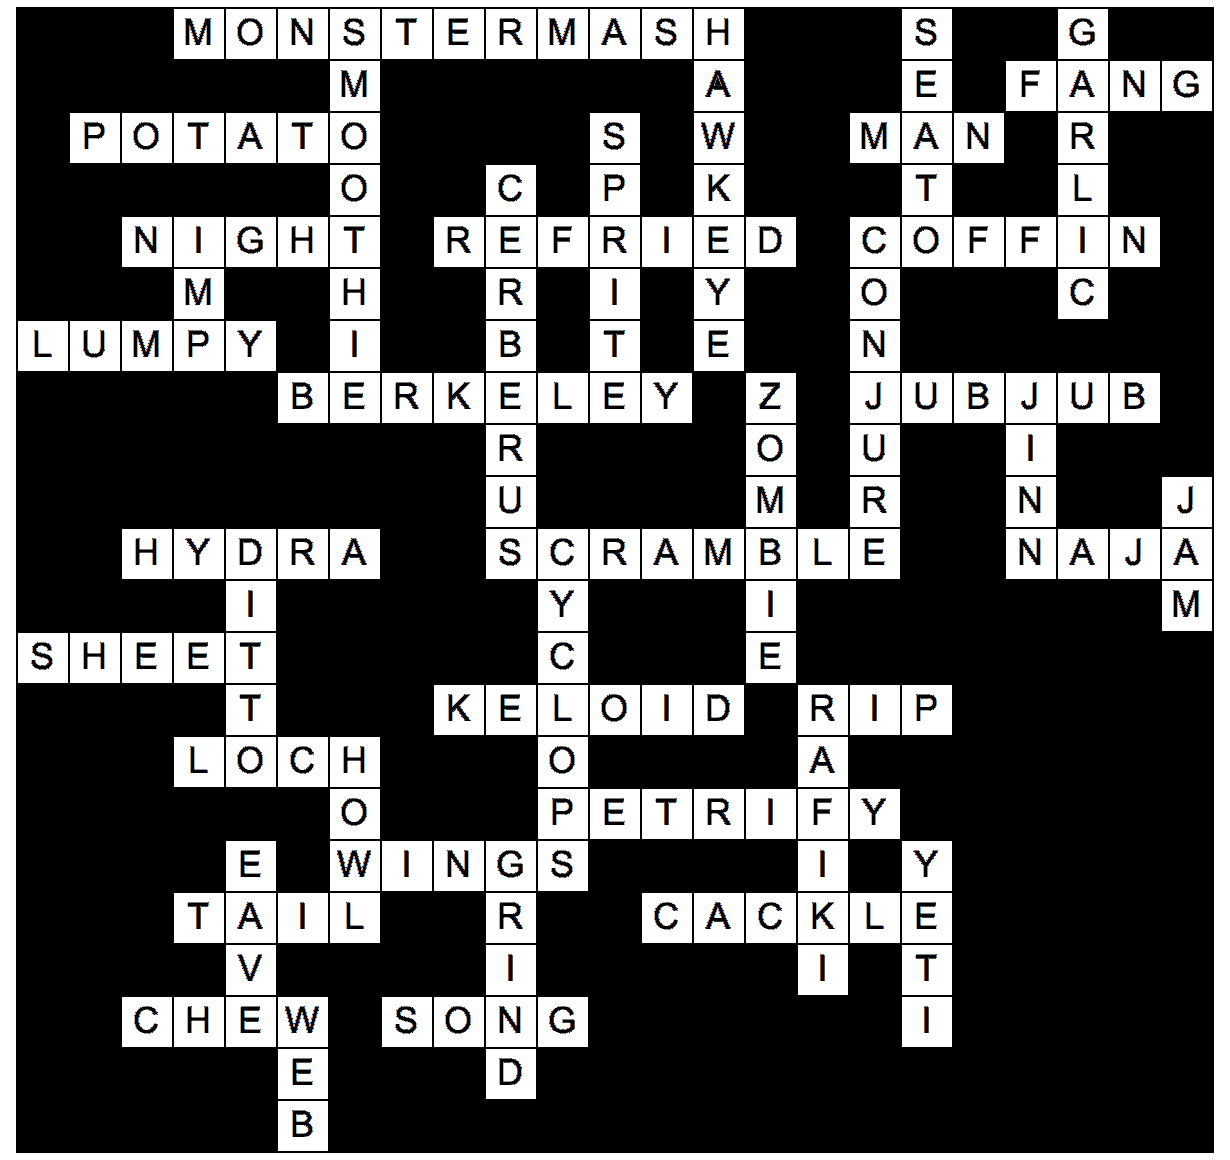 Clarion Crossword Answers: Week 7 DU Clarion